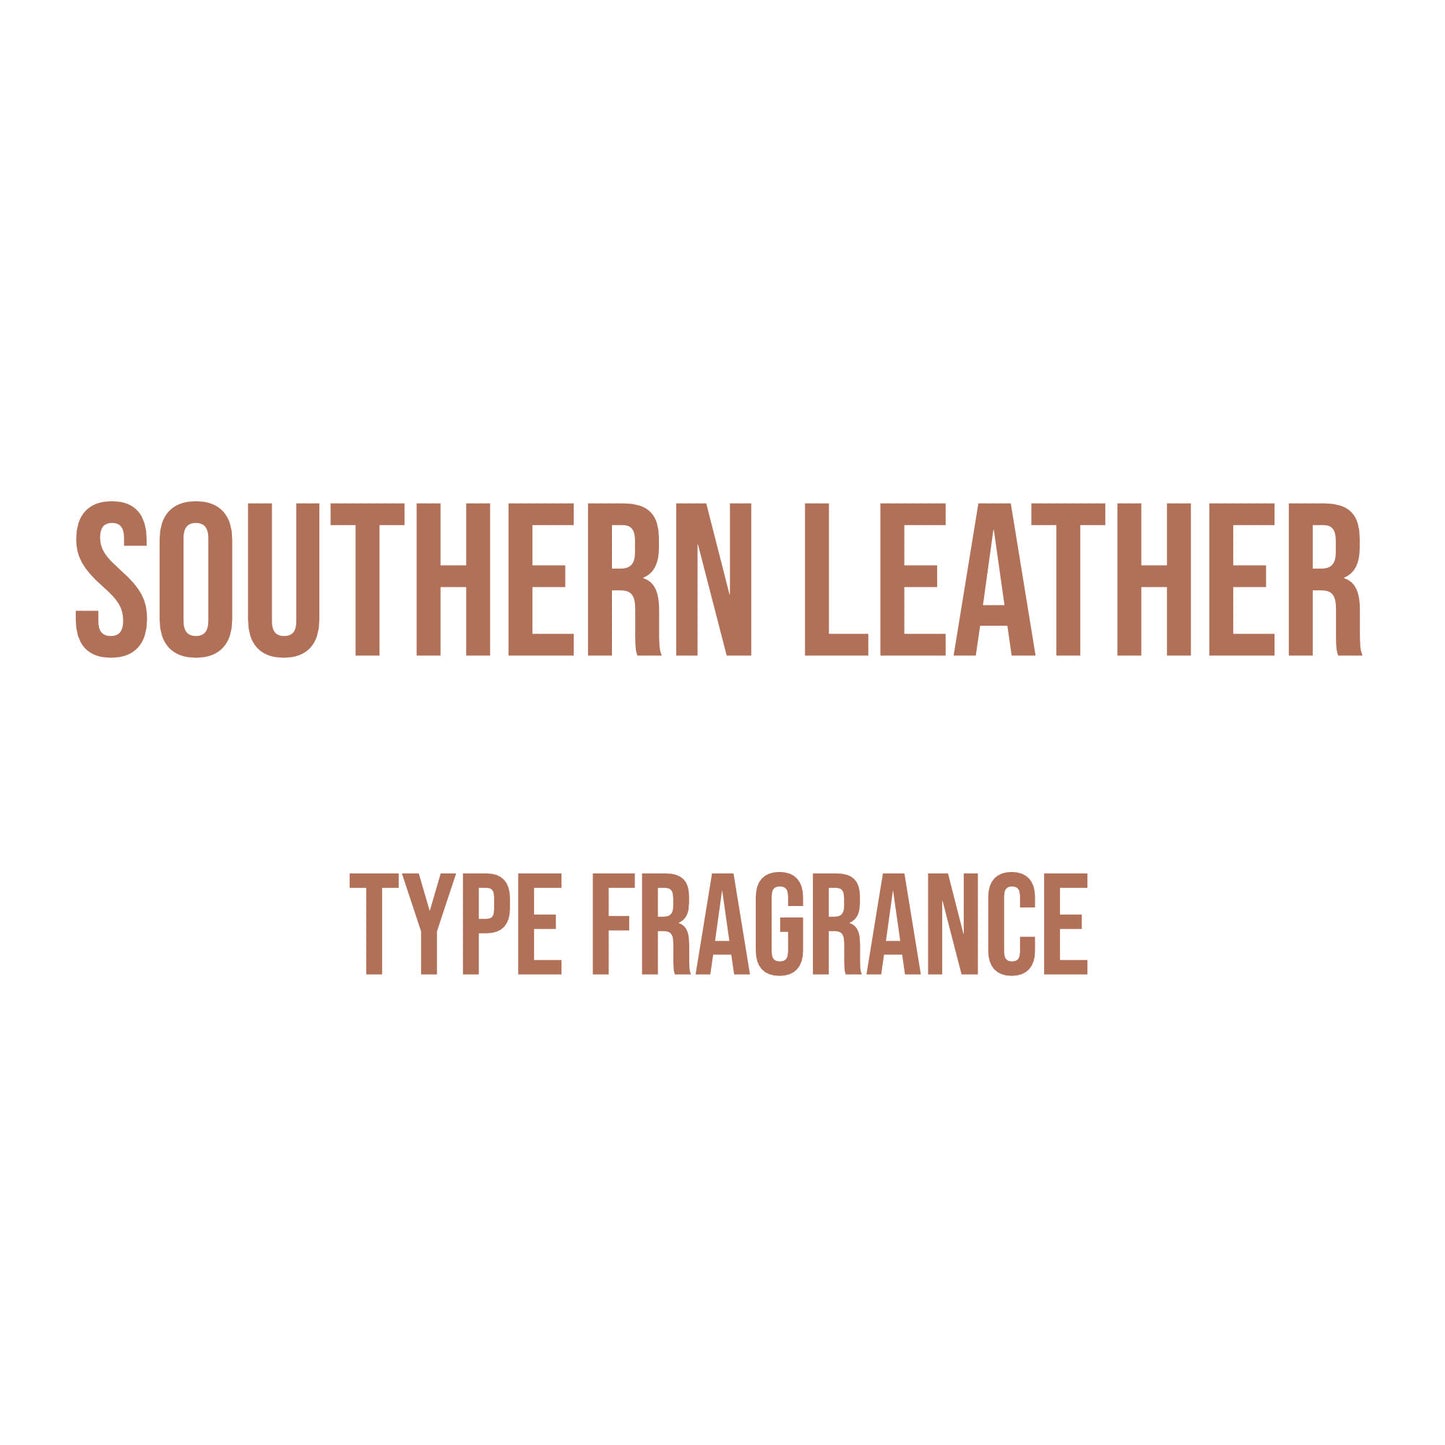 Southern Leather Type Fragrance